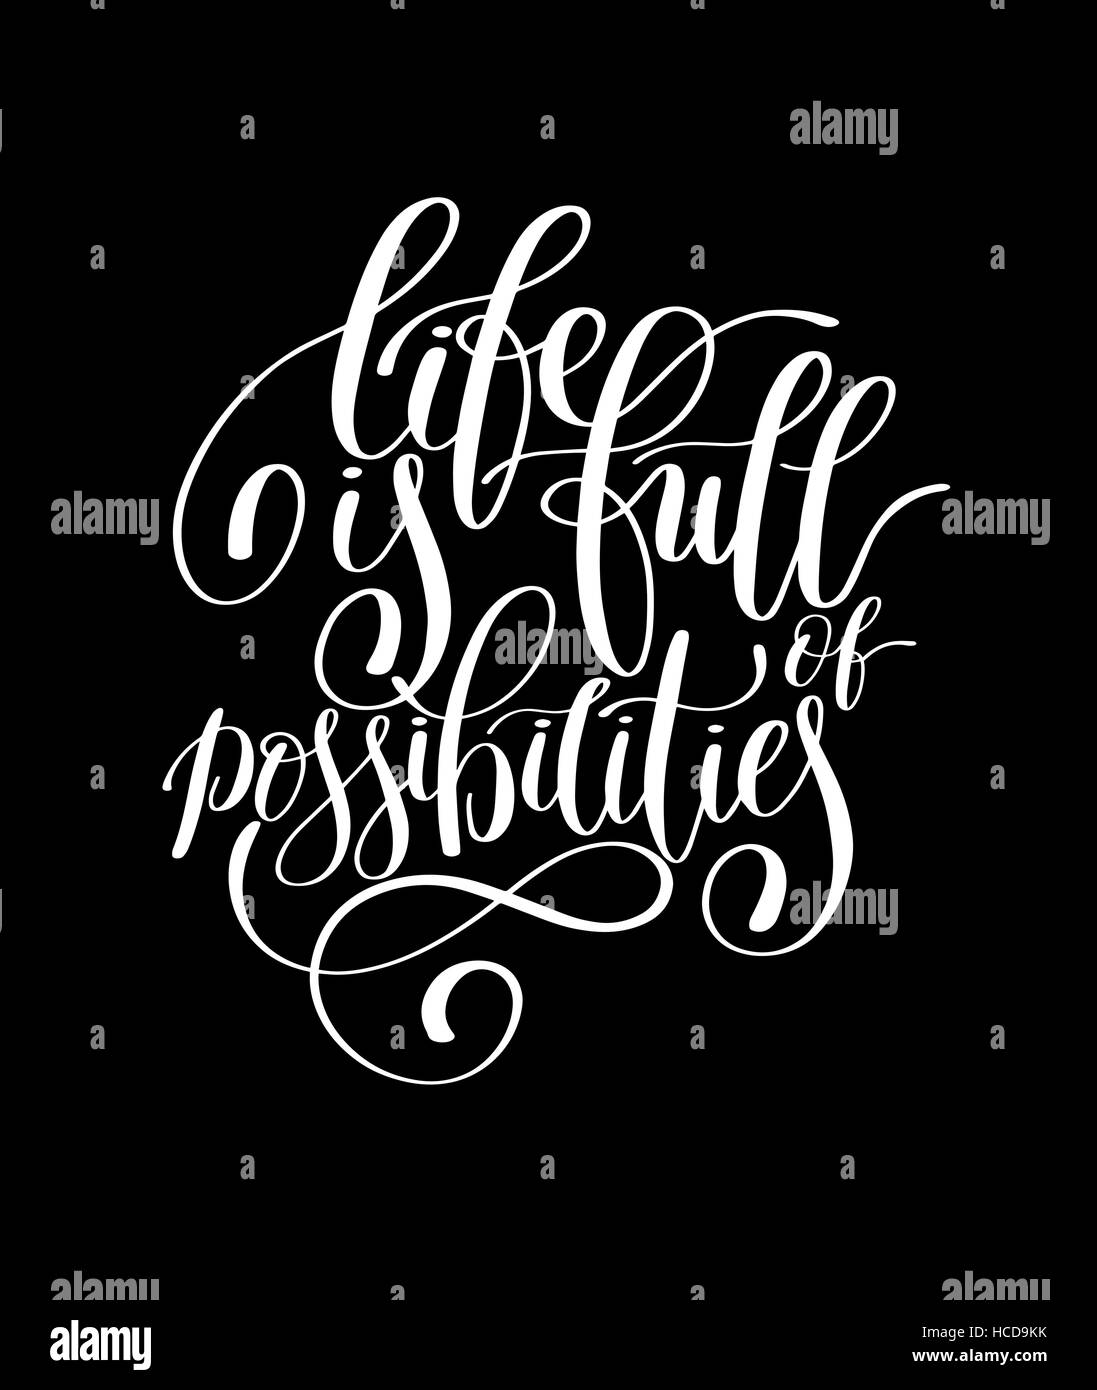 Life is Full of Possibilities Inspirational Quote in English Stock Vector